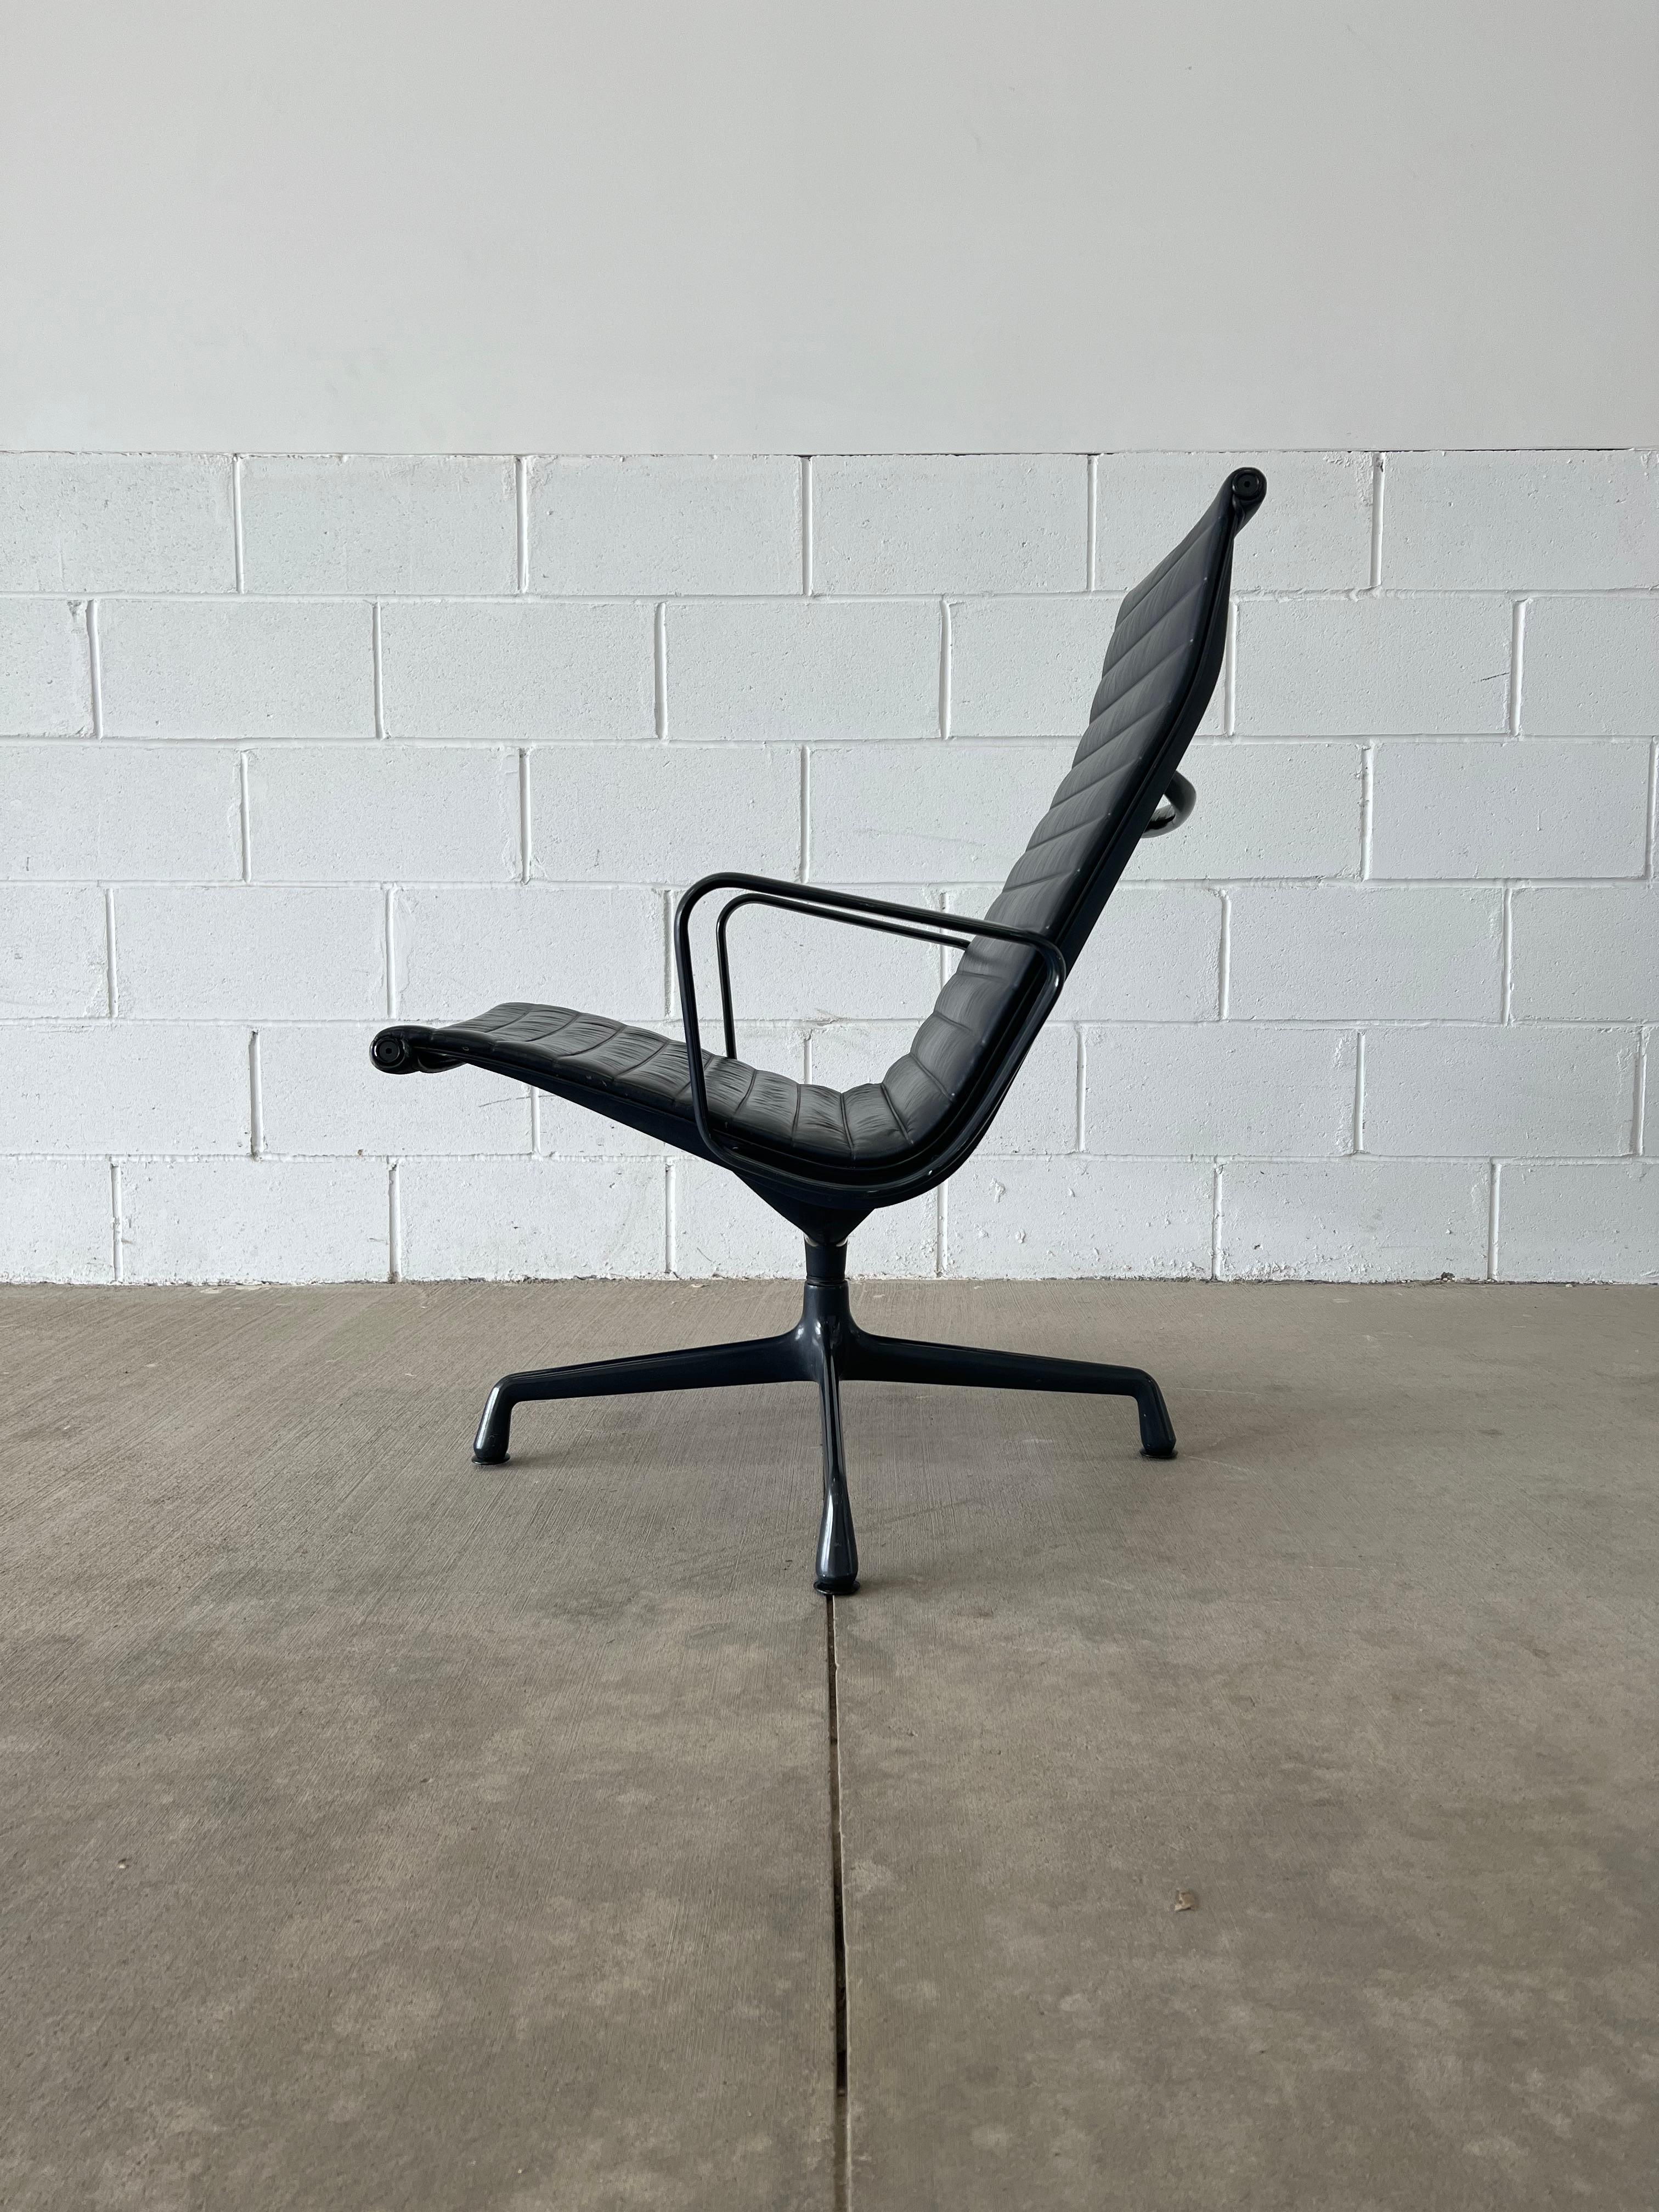 An iconic silhouette in contemporary finish, the Aluminum Group Lounge Chair by husband and wife duo Charles and Ray Eames.